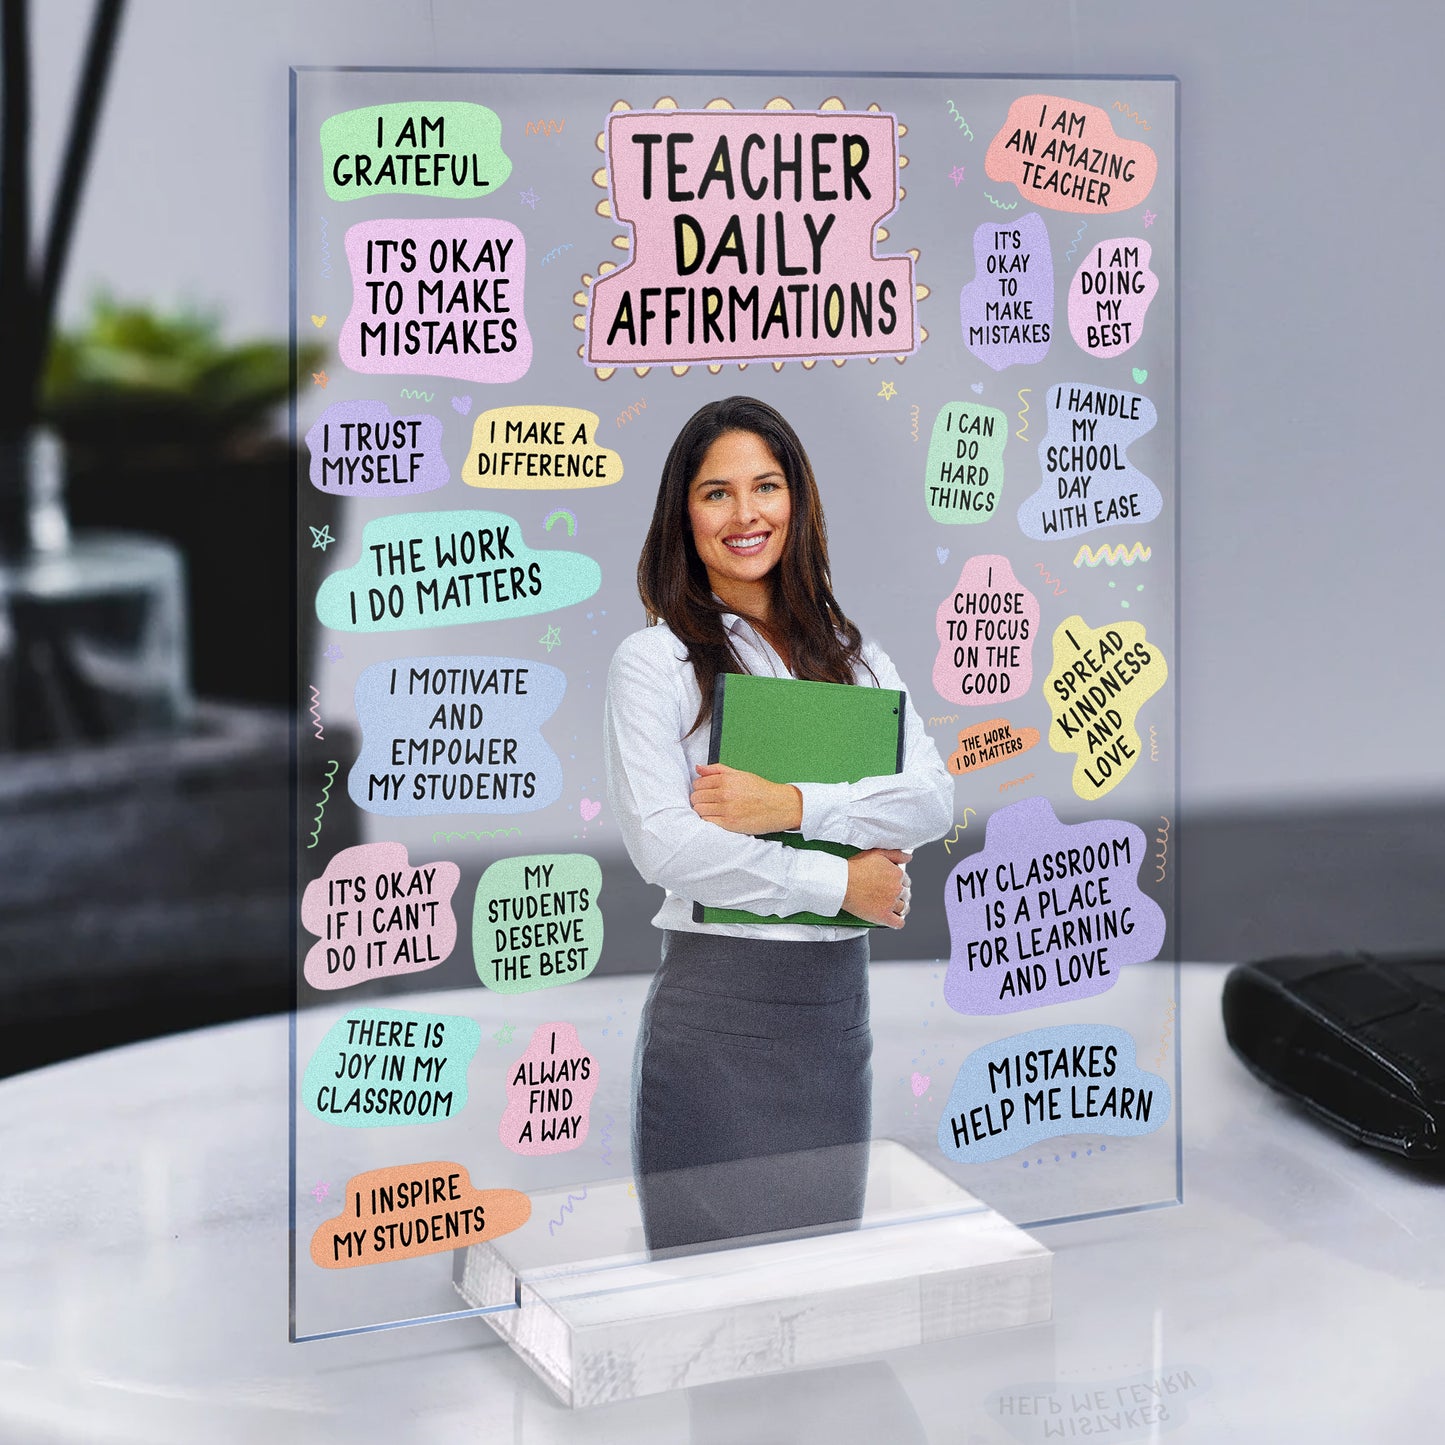 This Is Teacher Daily Affirmation - Personalized Acrylic Photo Plaque